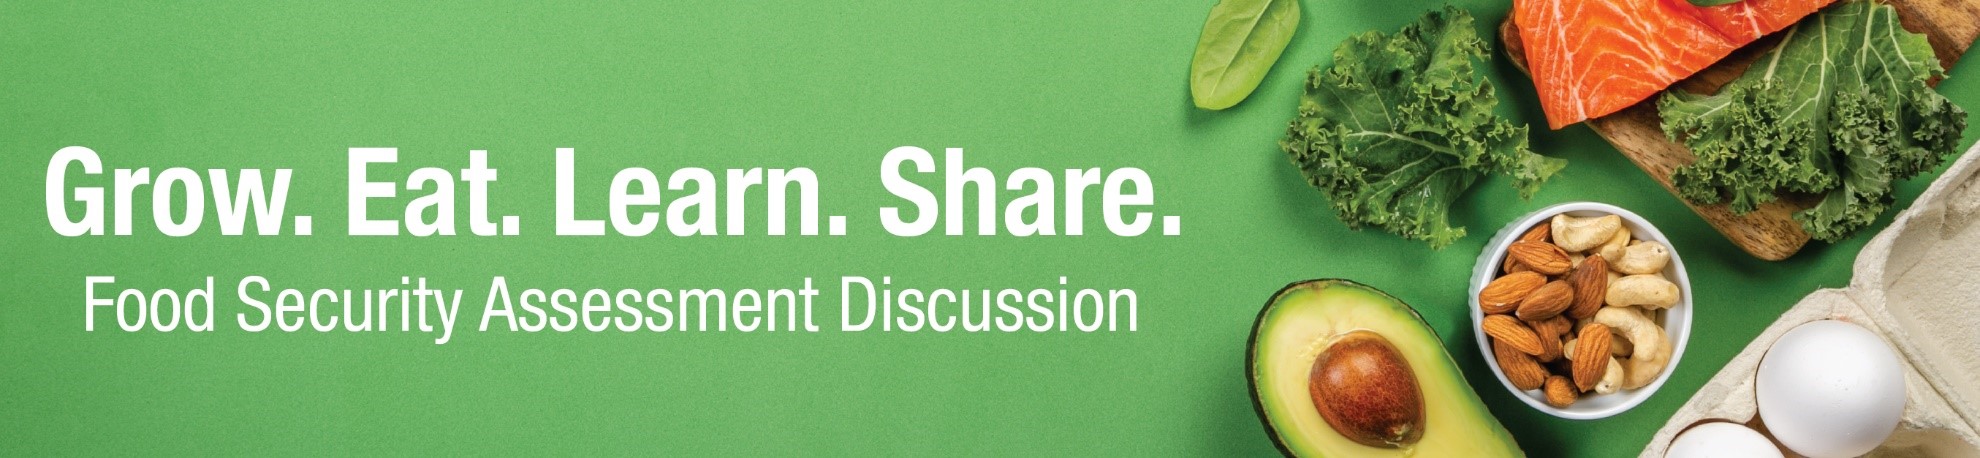 Grow. Eat. Learn. Share. Food Security Assessment Discussion